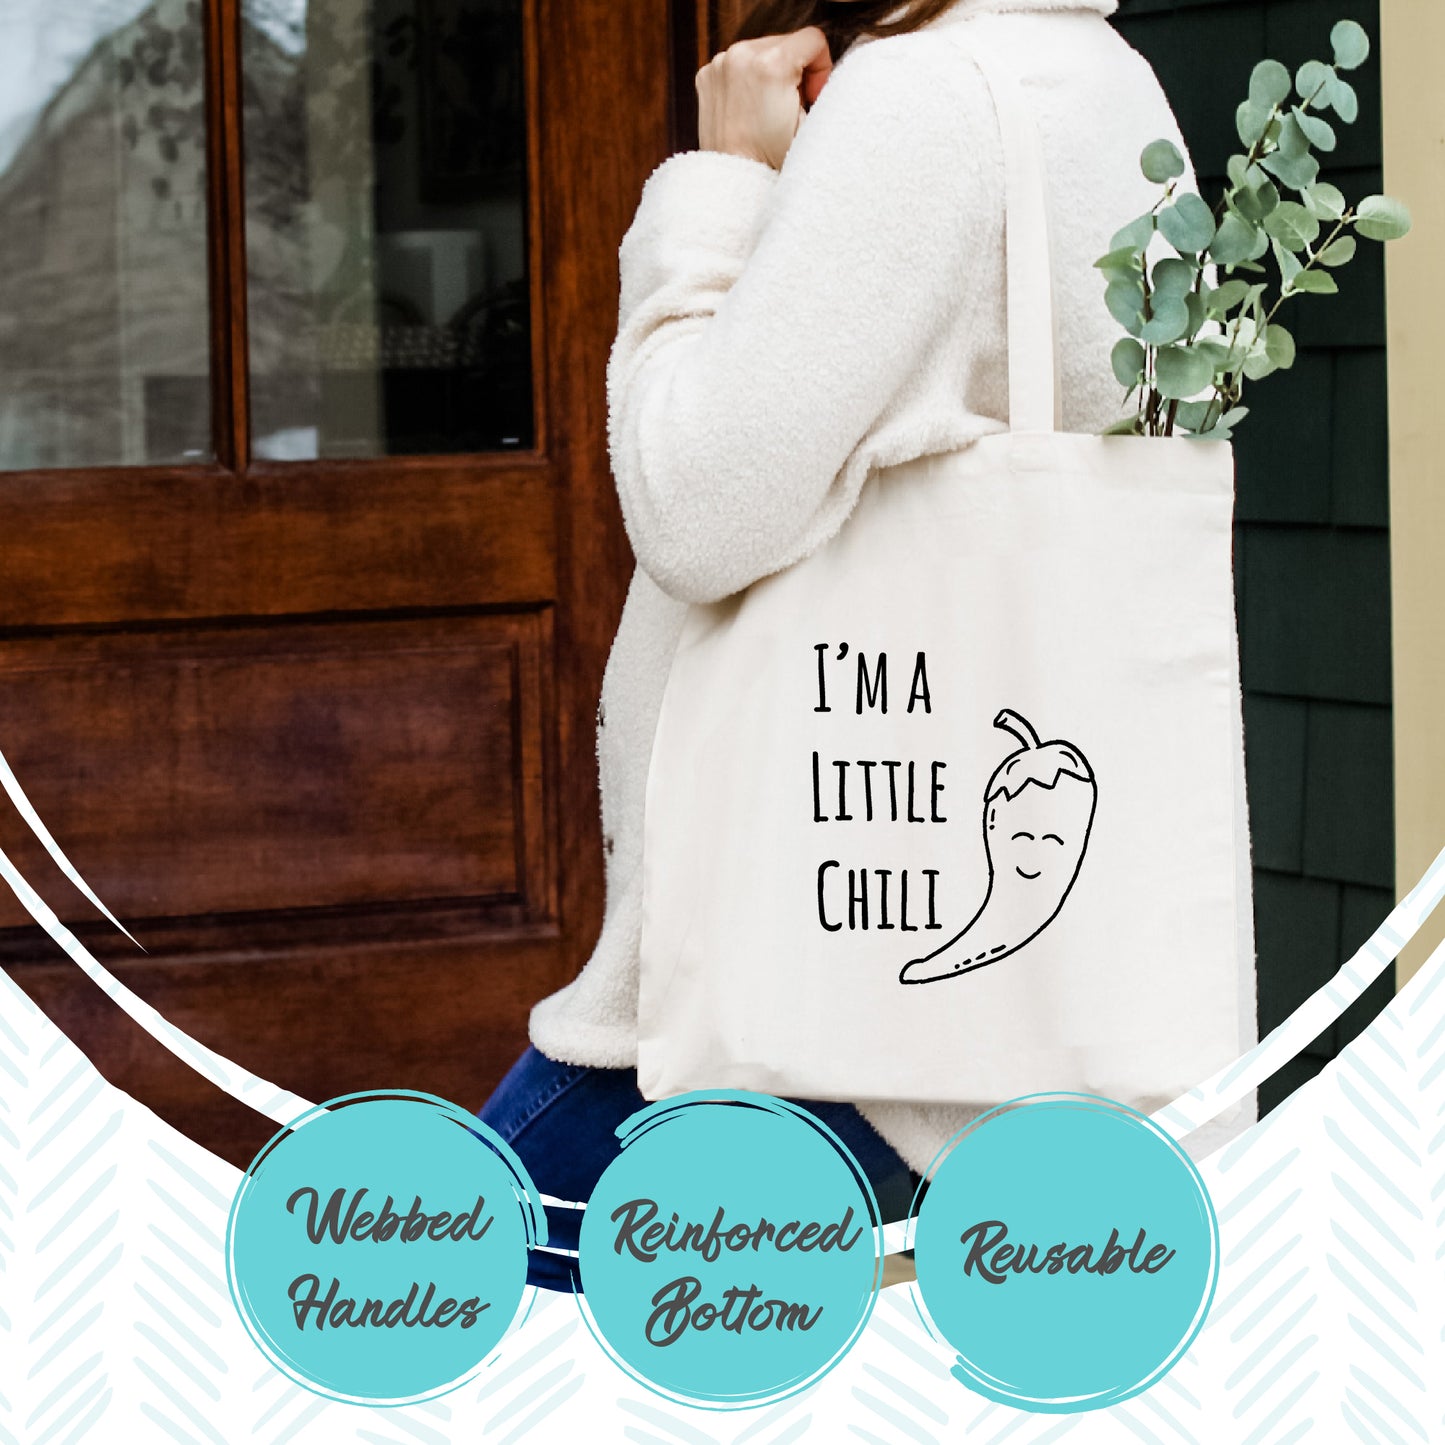 Whale Hello There - Tote Bag - MoonlightMakers